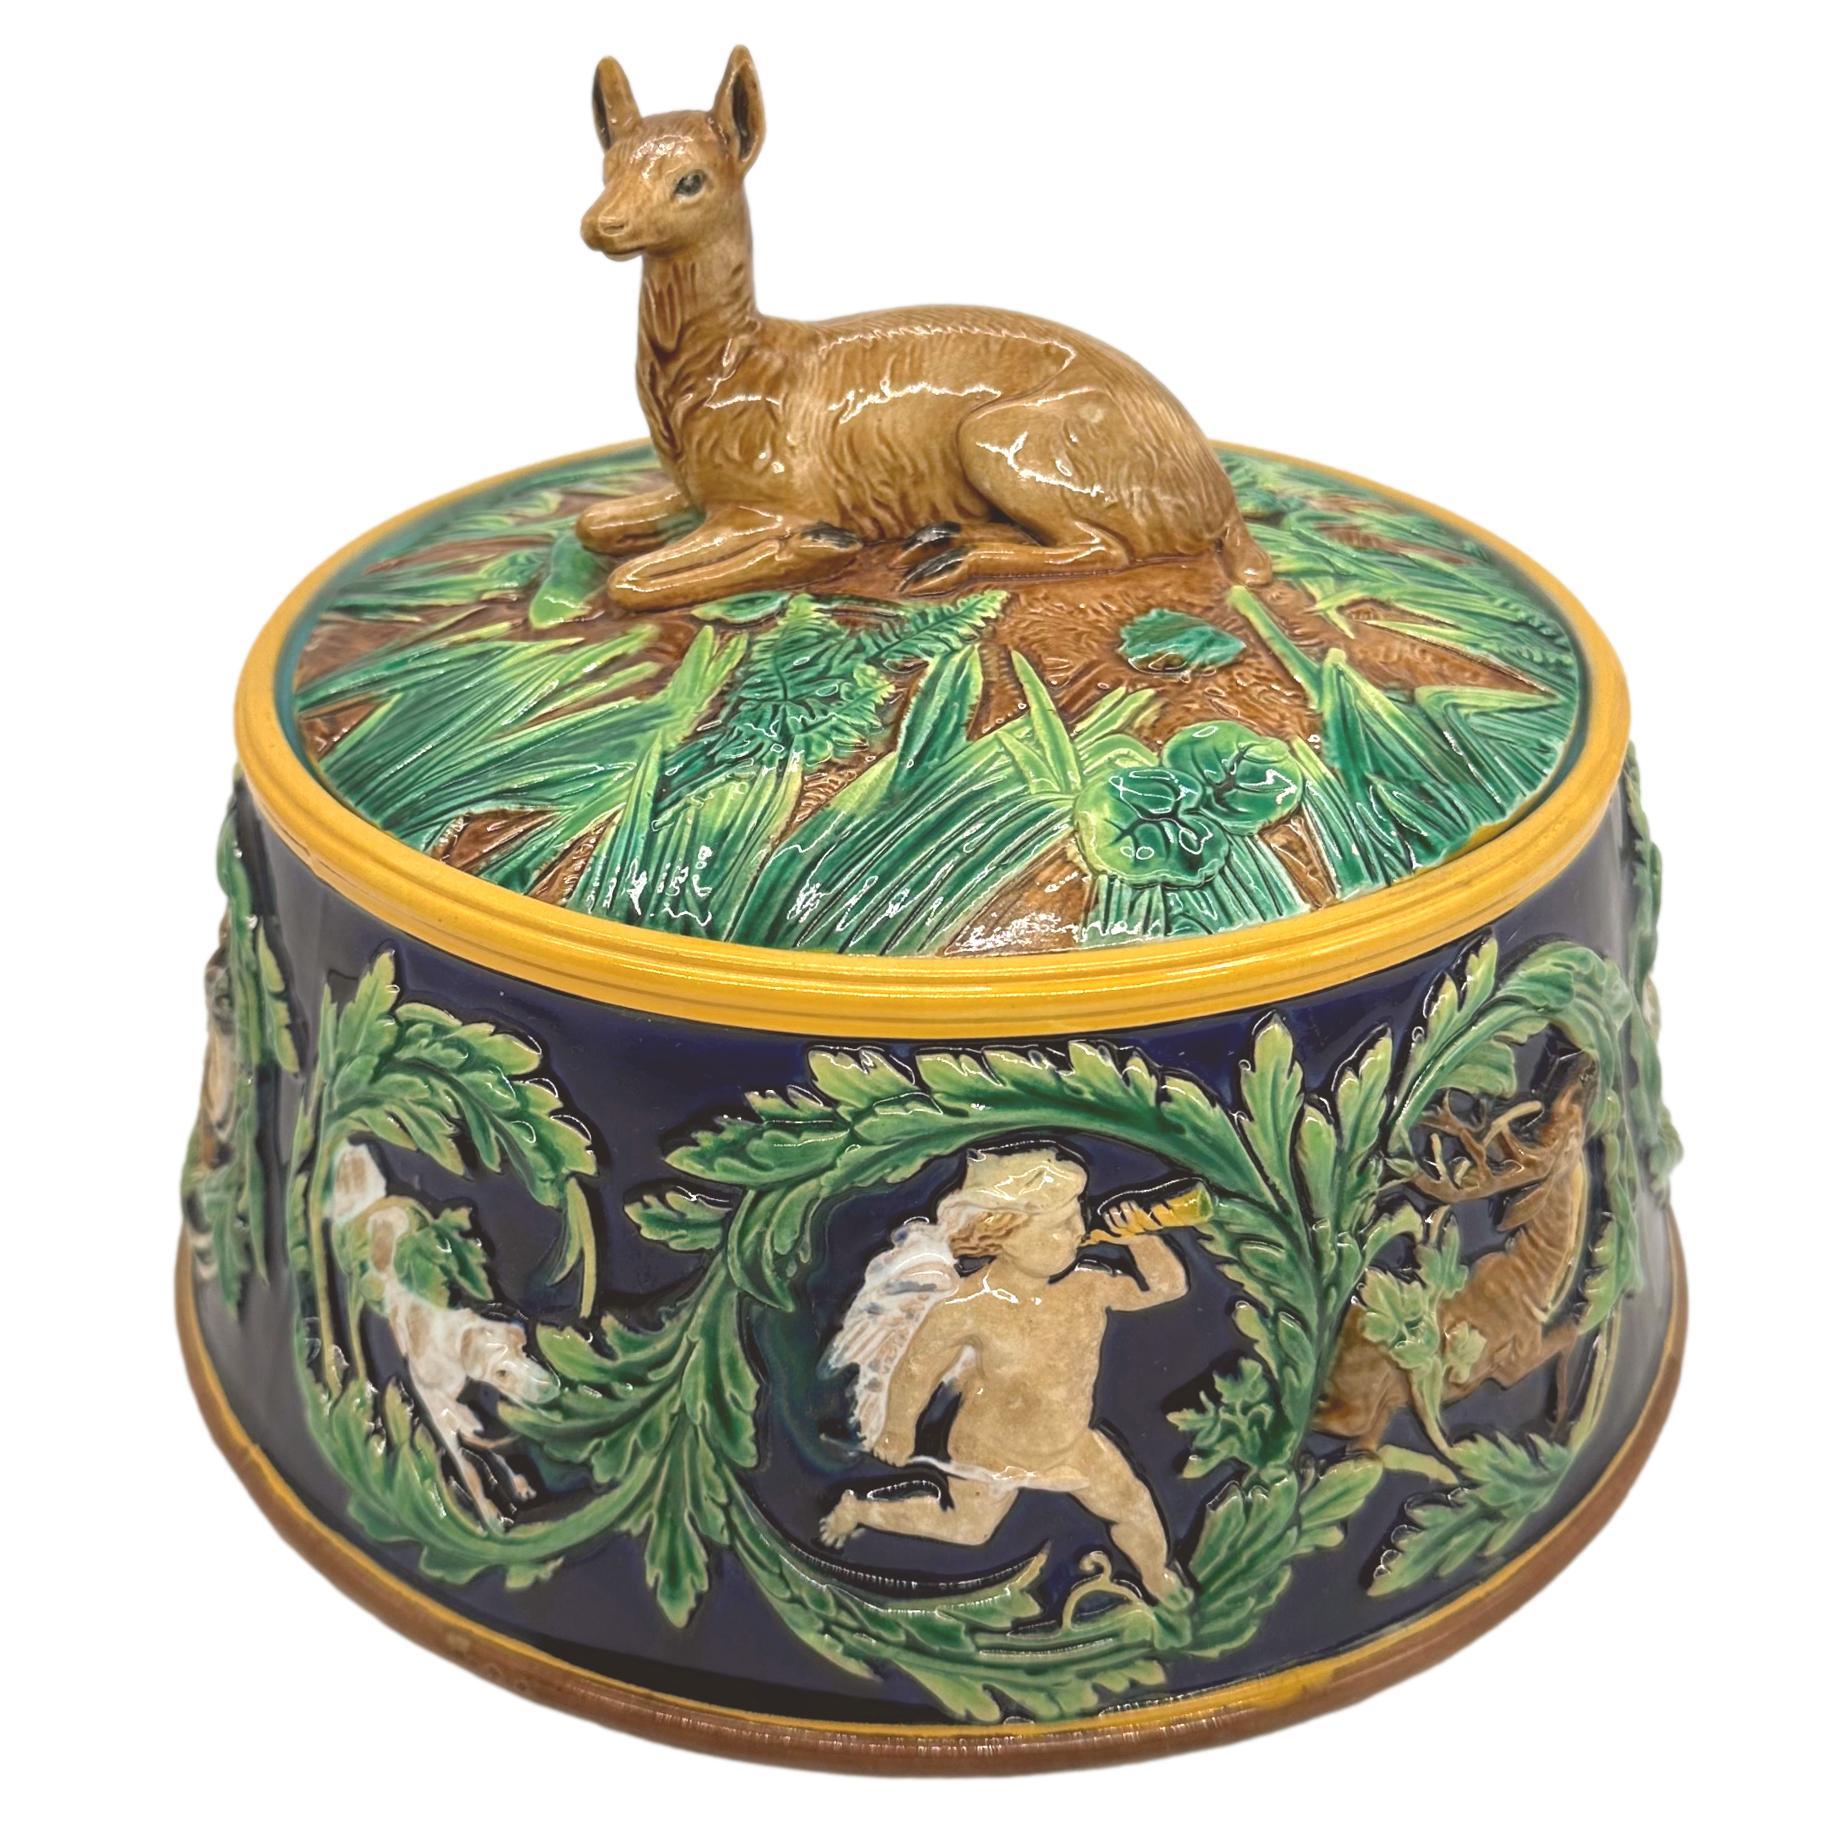 A George Jones Majolica Game Pie Tureen, the cover formed as a domed rustic mound with green glazed ferns and grasses, surmounted by a naturalistically molded and glazed recumbent doe, the base encircled with relief-molded images of Artemis, Greek